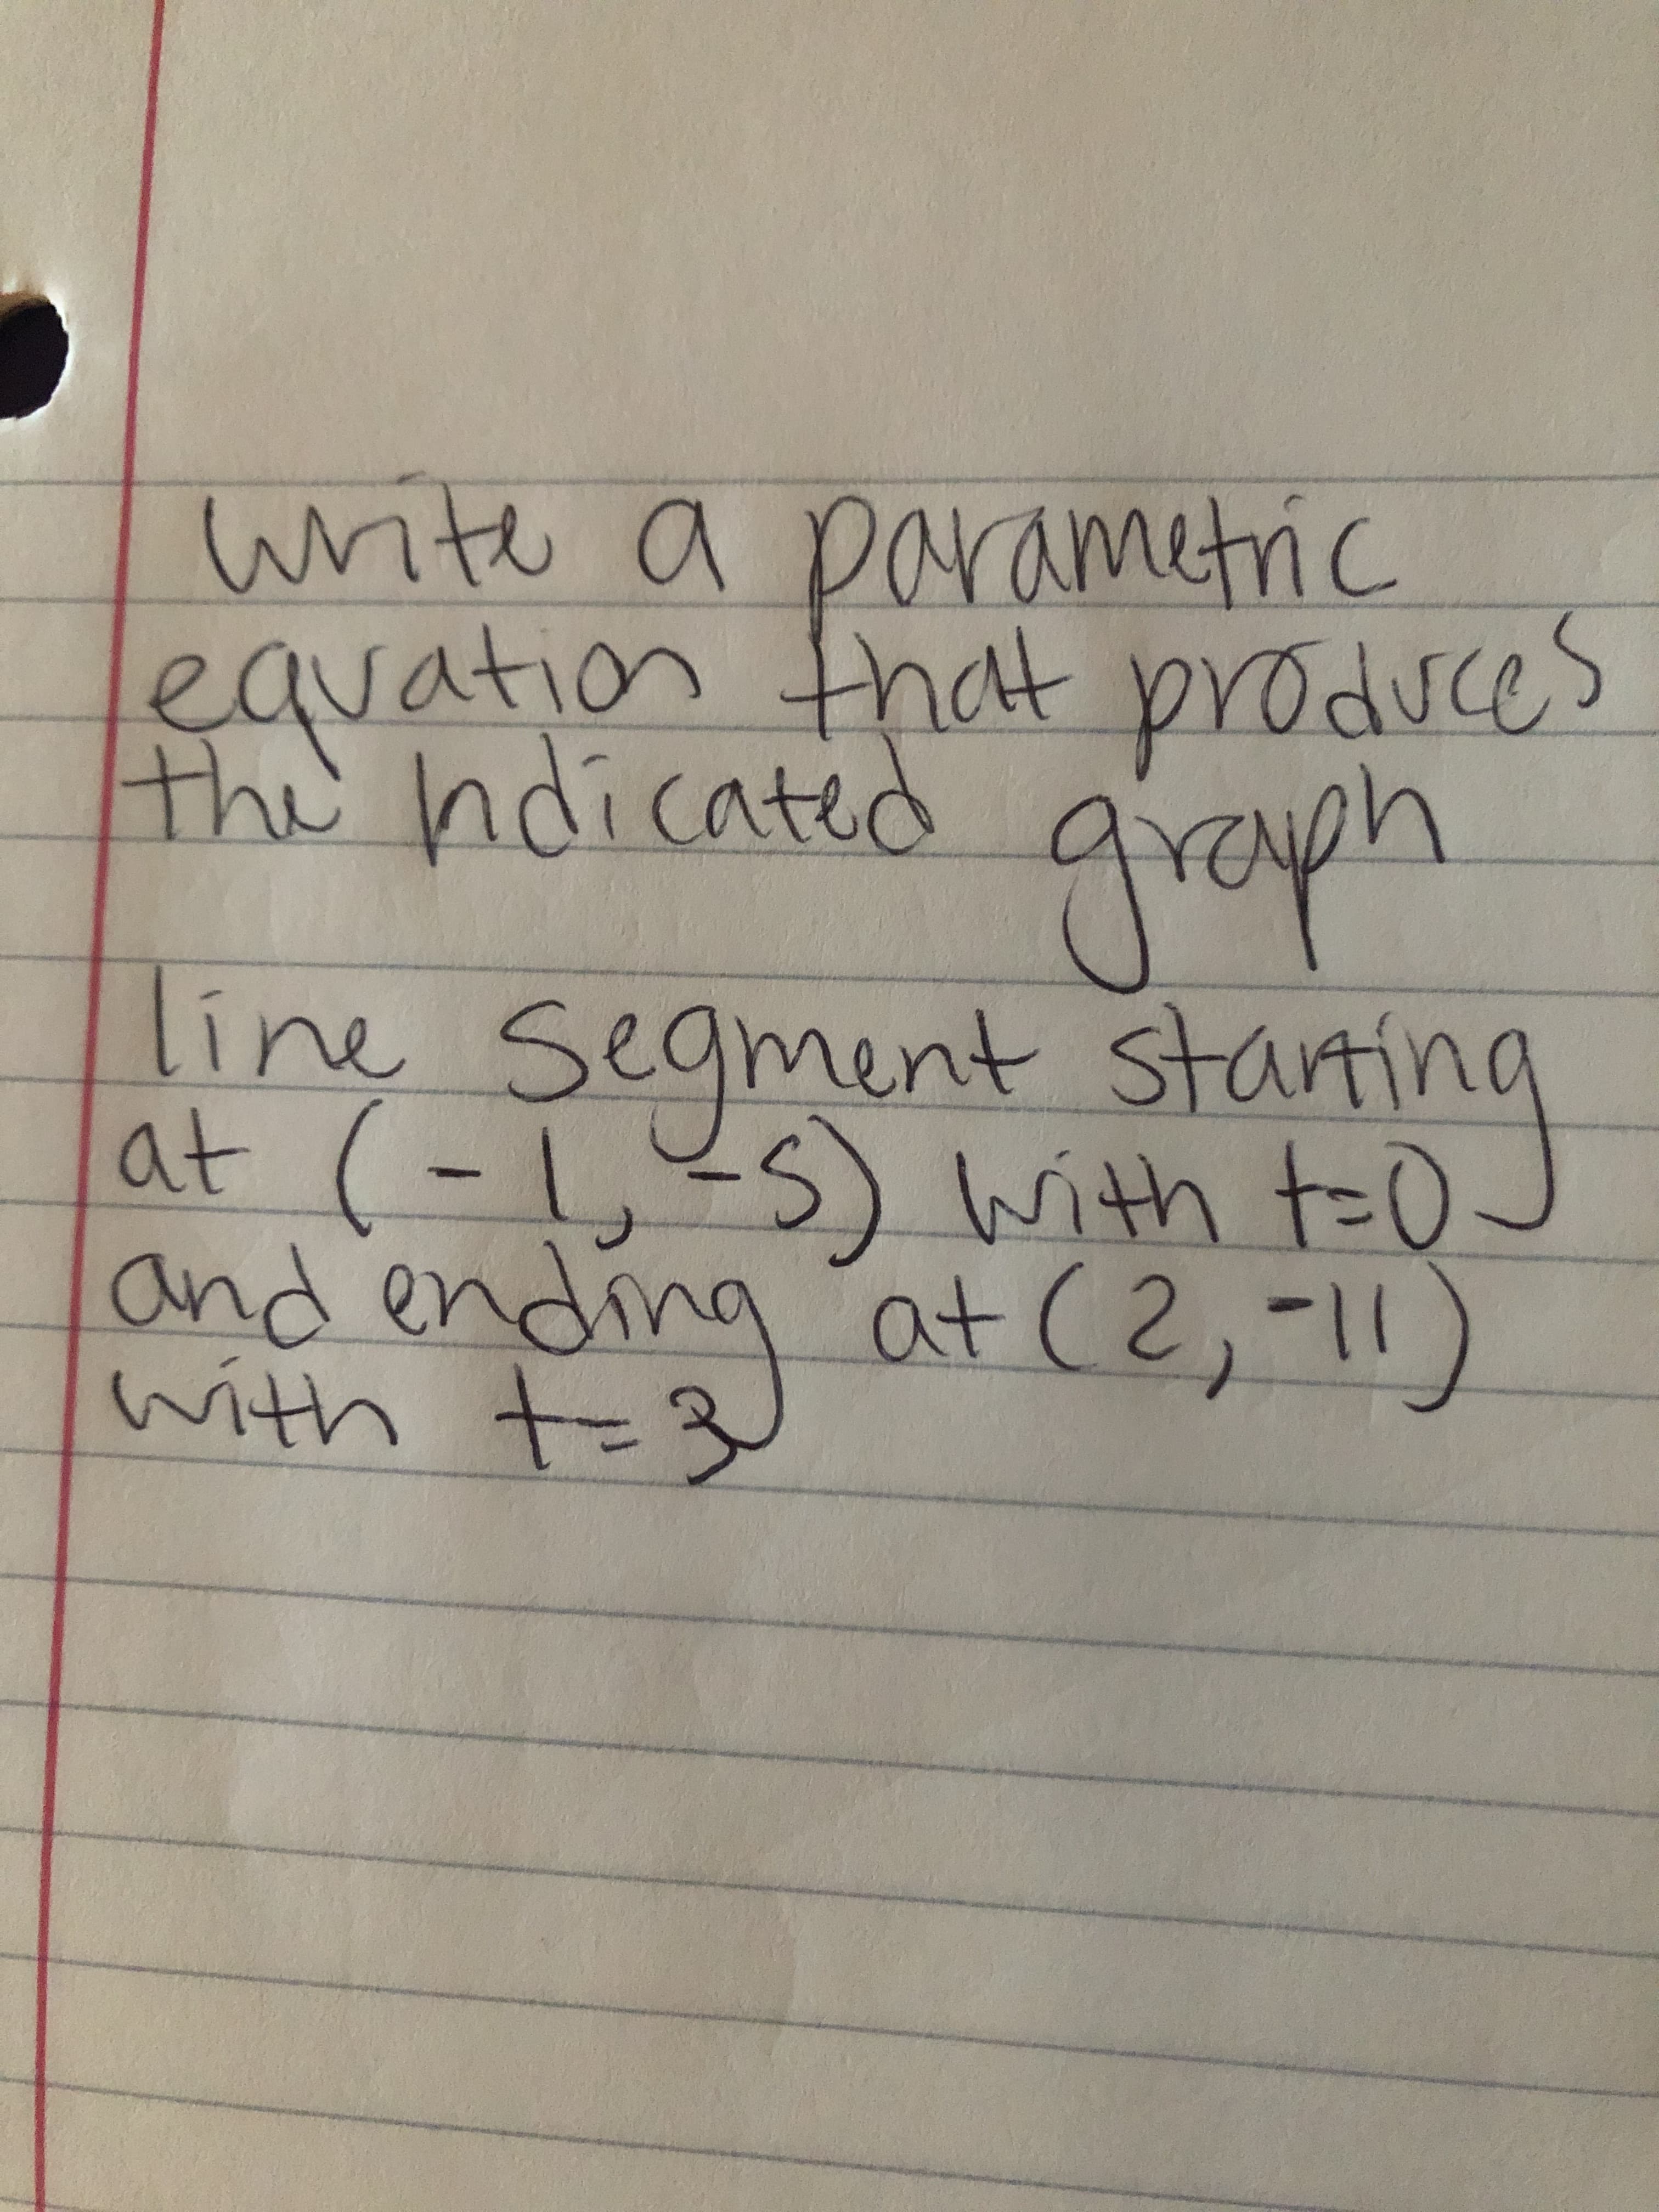 write a parametric
lequation that produces
the ndicated
graph
line Segment startin
at (-,?s) with t=0
and ending at (2,-11)
with t=3
